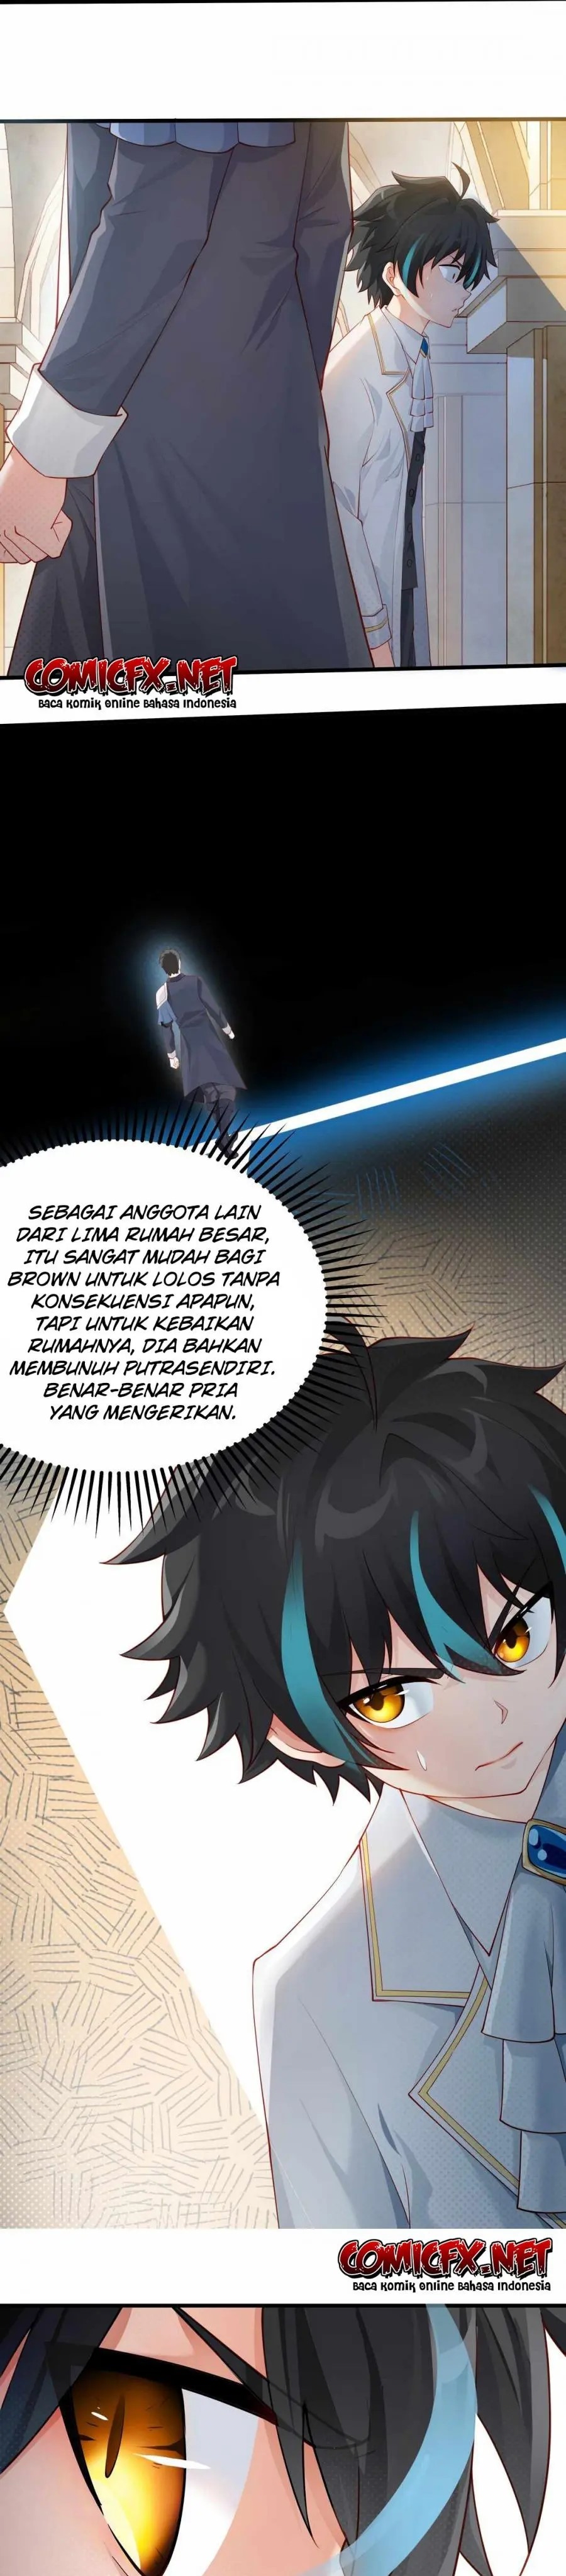 Dilarang COPAS - situs resmi www.mangacanblog.com - Komik little tyrant doesnt want to meet with a bad end 010 - chapter 10 11 Indonesia little tyrant doesnt want to meet with a bad end 010 - chapter 10 Terbaru 12|Baca Manga Komik Indonesia|Mangacan